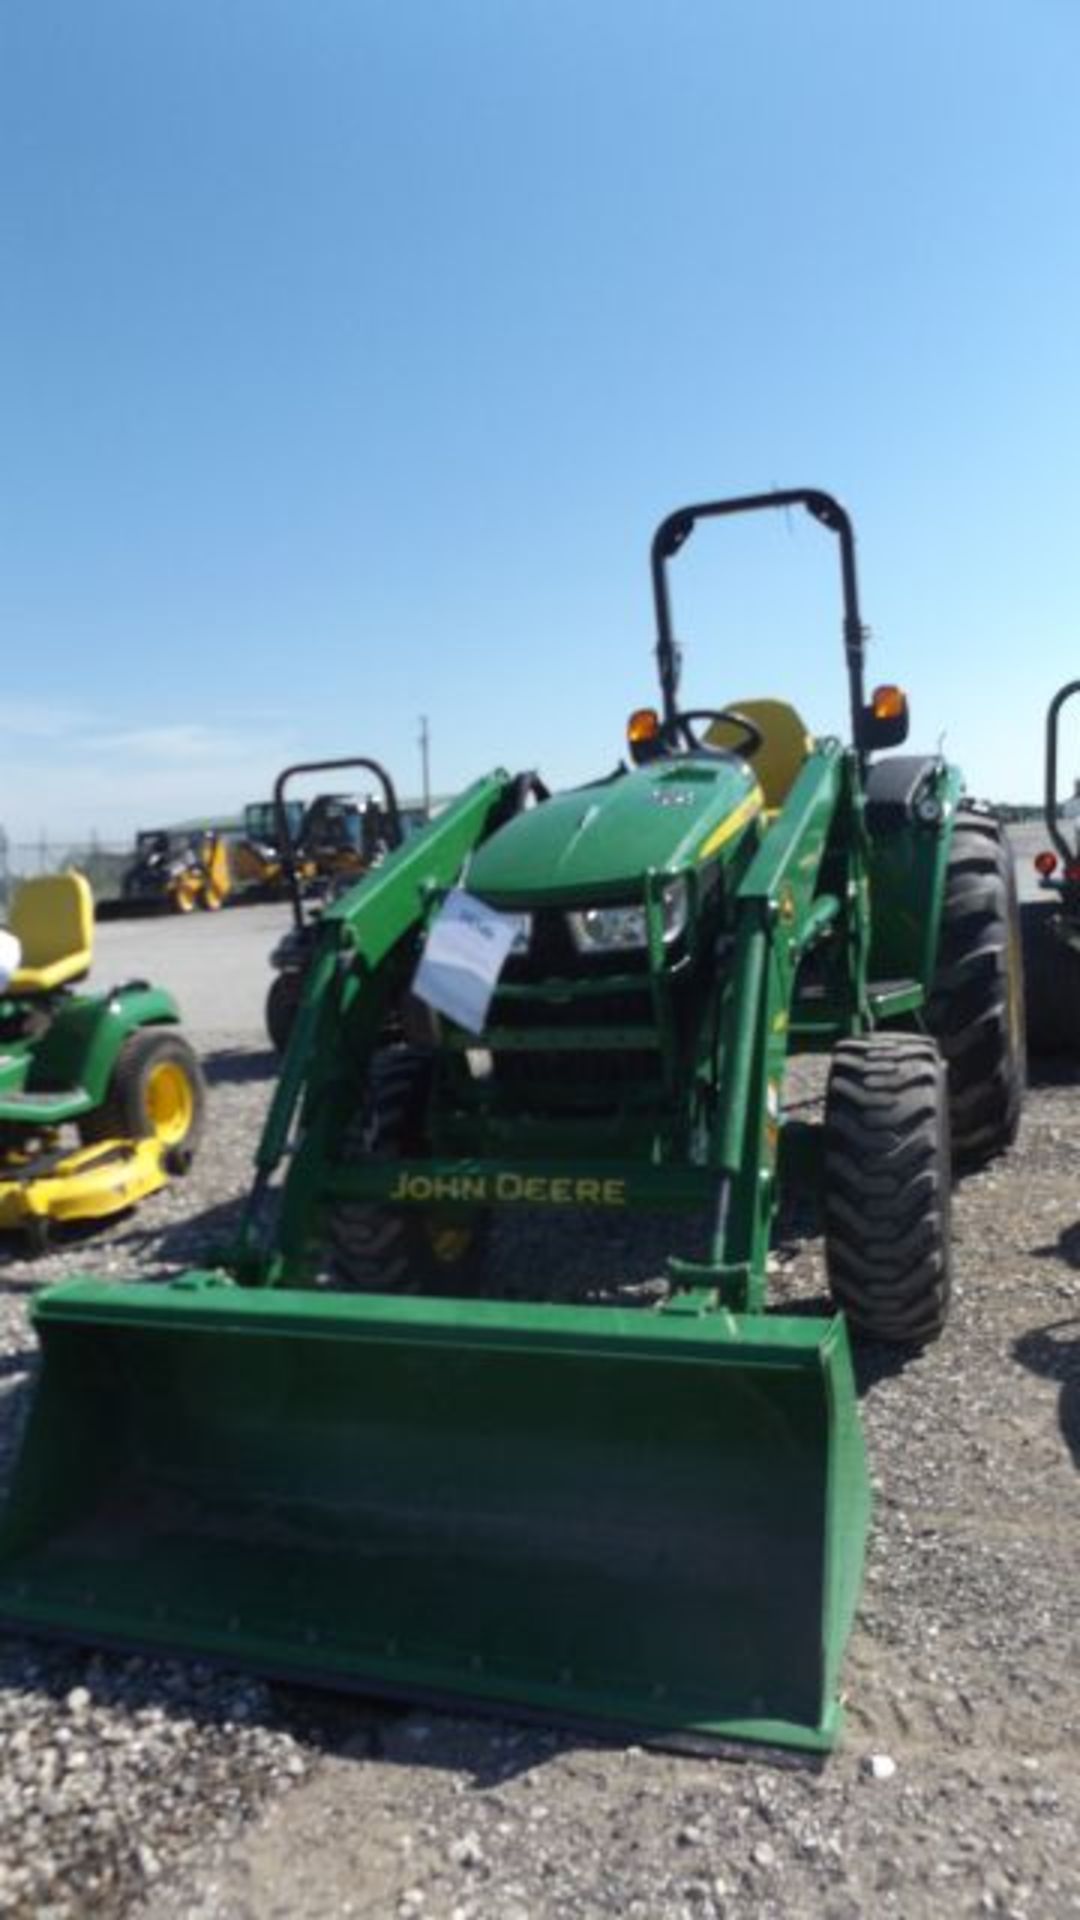 2015 JD 4052R Compact Tractor #112100, 35 hrs, MFWD, 52hp Yanmar, Turbo Diesel, 3 spd, Hydro, OS, - Image 3 of 3